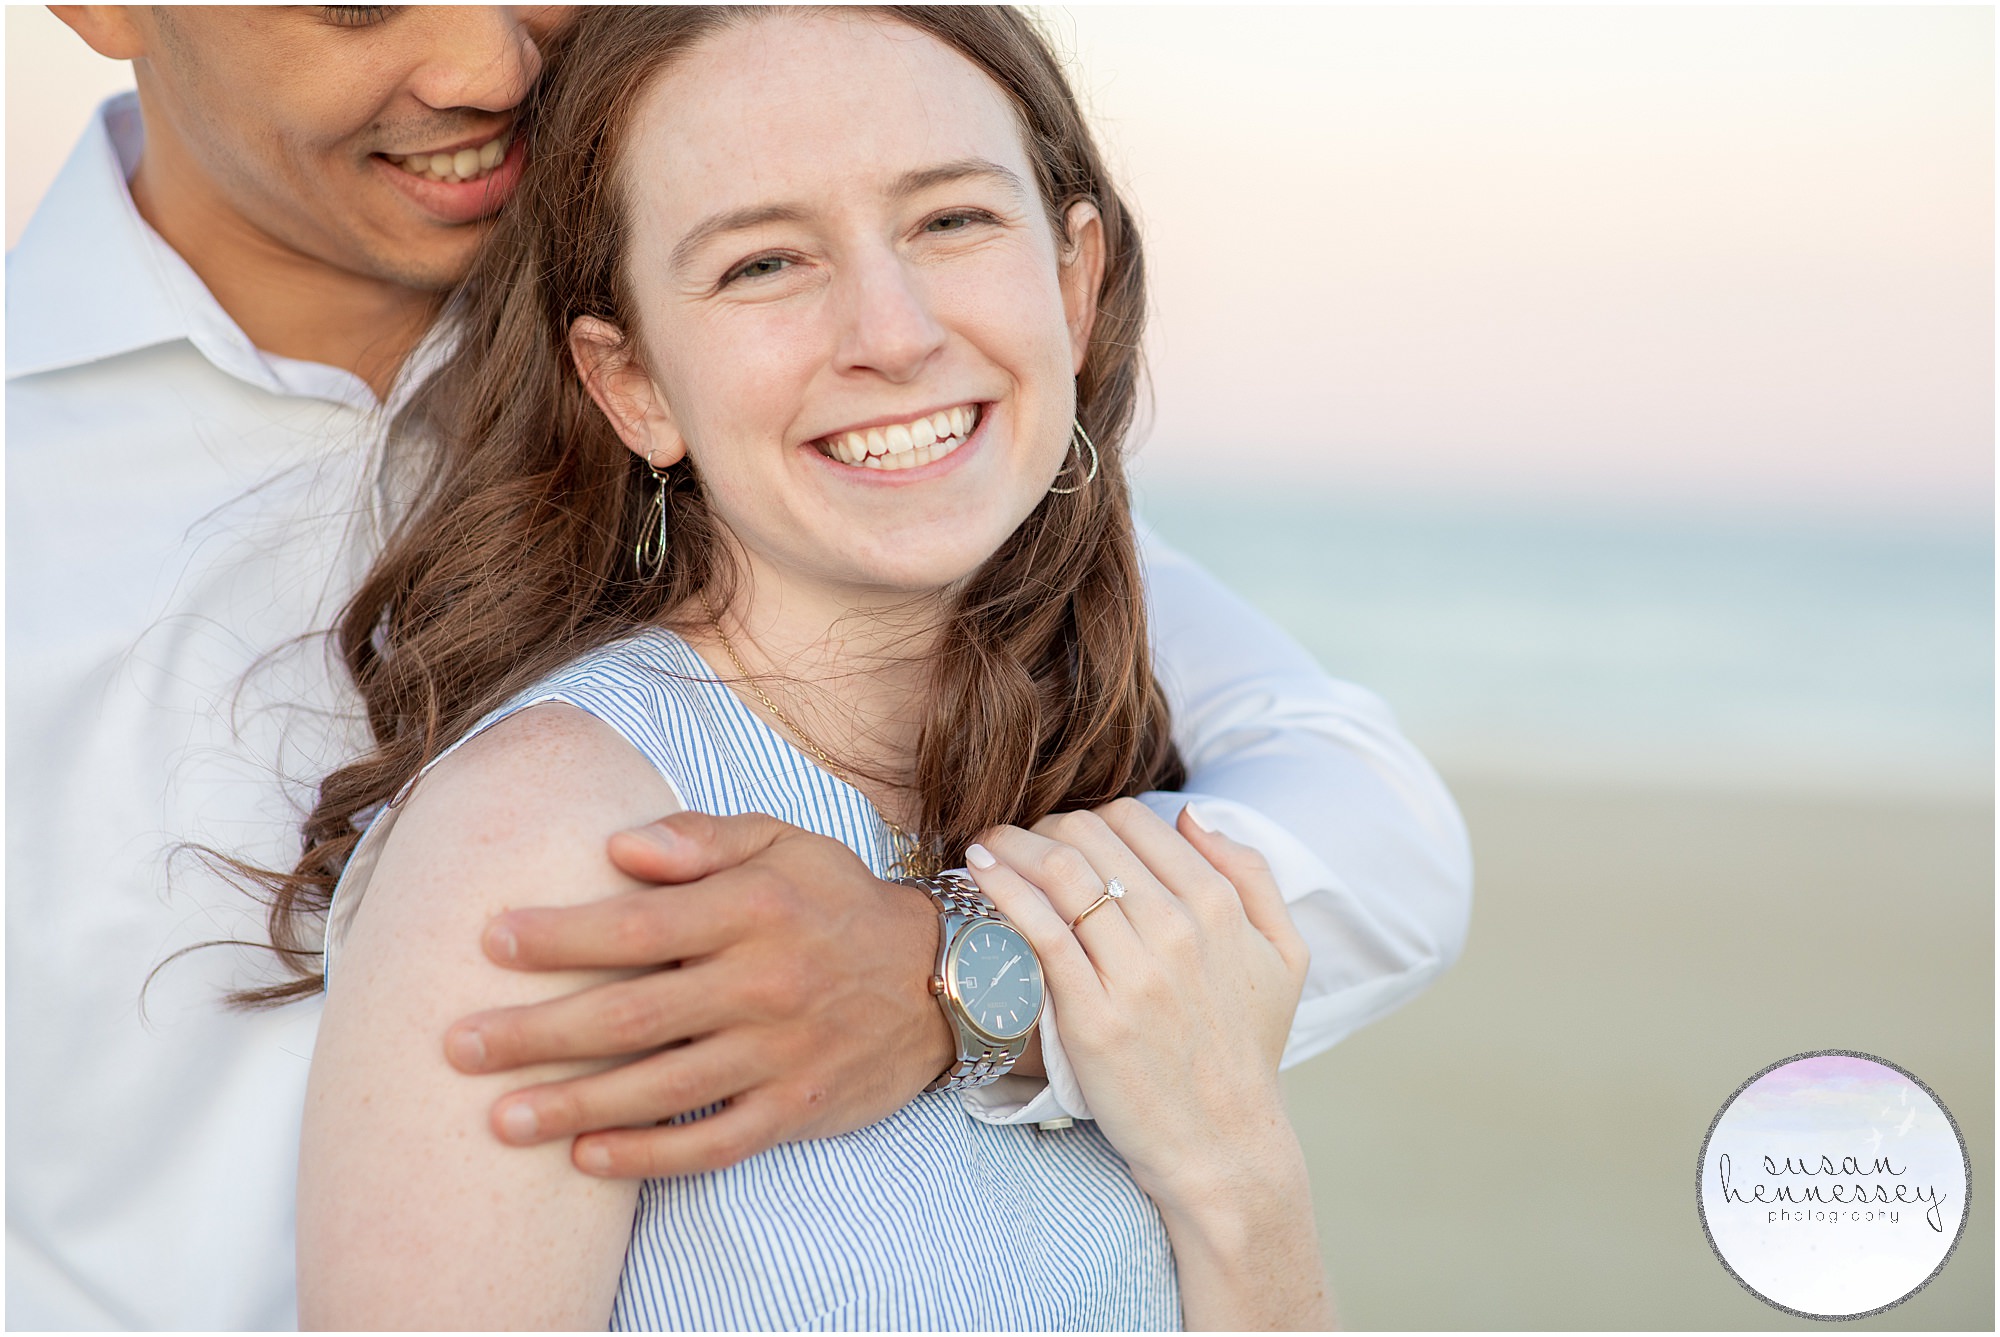 Carolyn & Nick had a classic engagement session at Bradley Beach